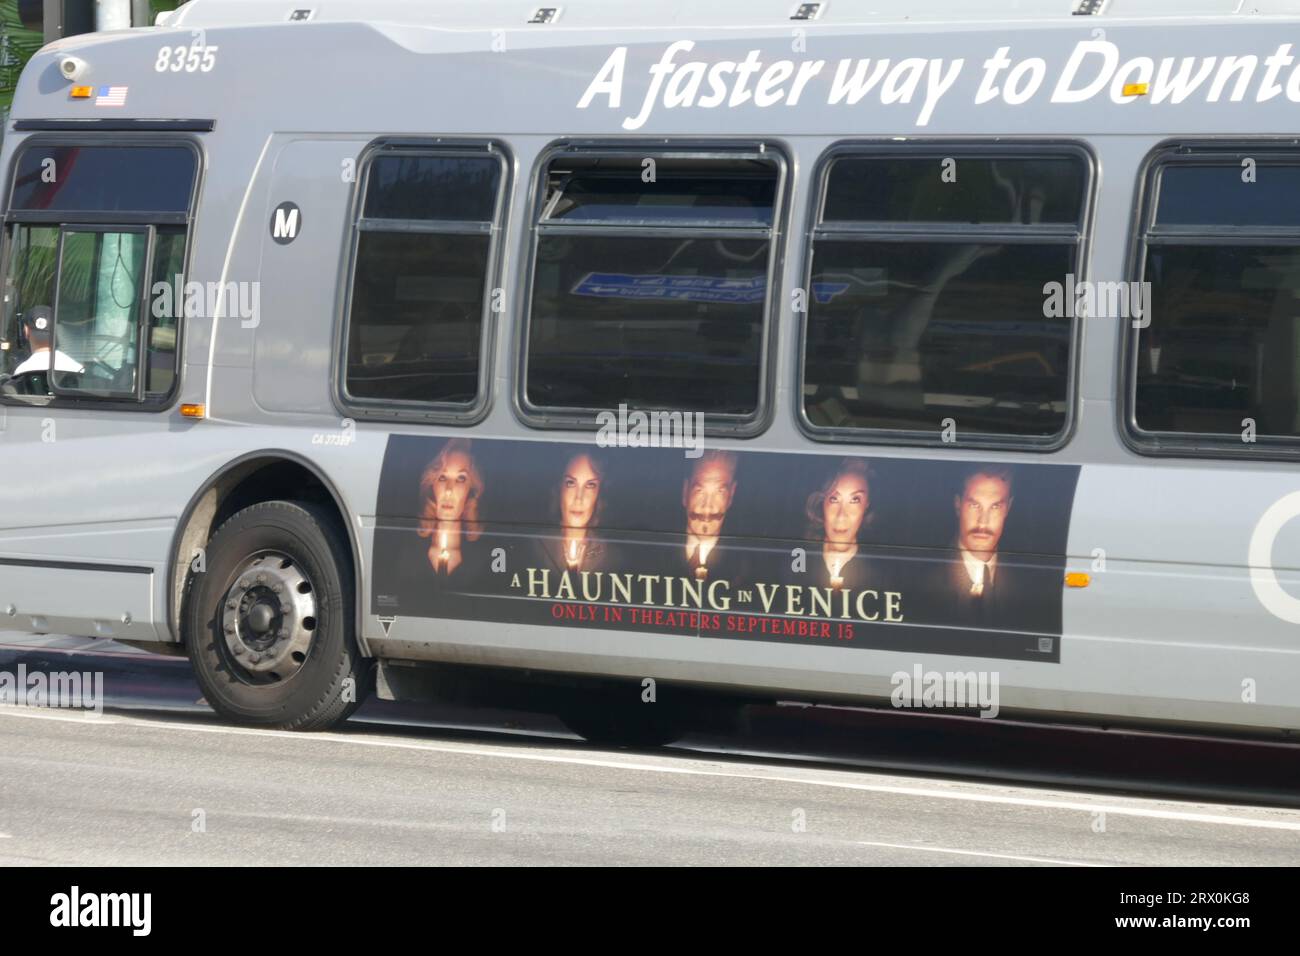 Los Angeles, California, USA 21st September 2023 Disney A Haunting in Venice Bus on September 21, 2023 in Los Angeles, California, USA. Photo by Barry King/Alamy Stock Photo Stock Photo